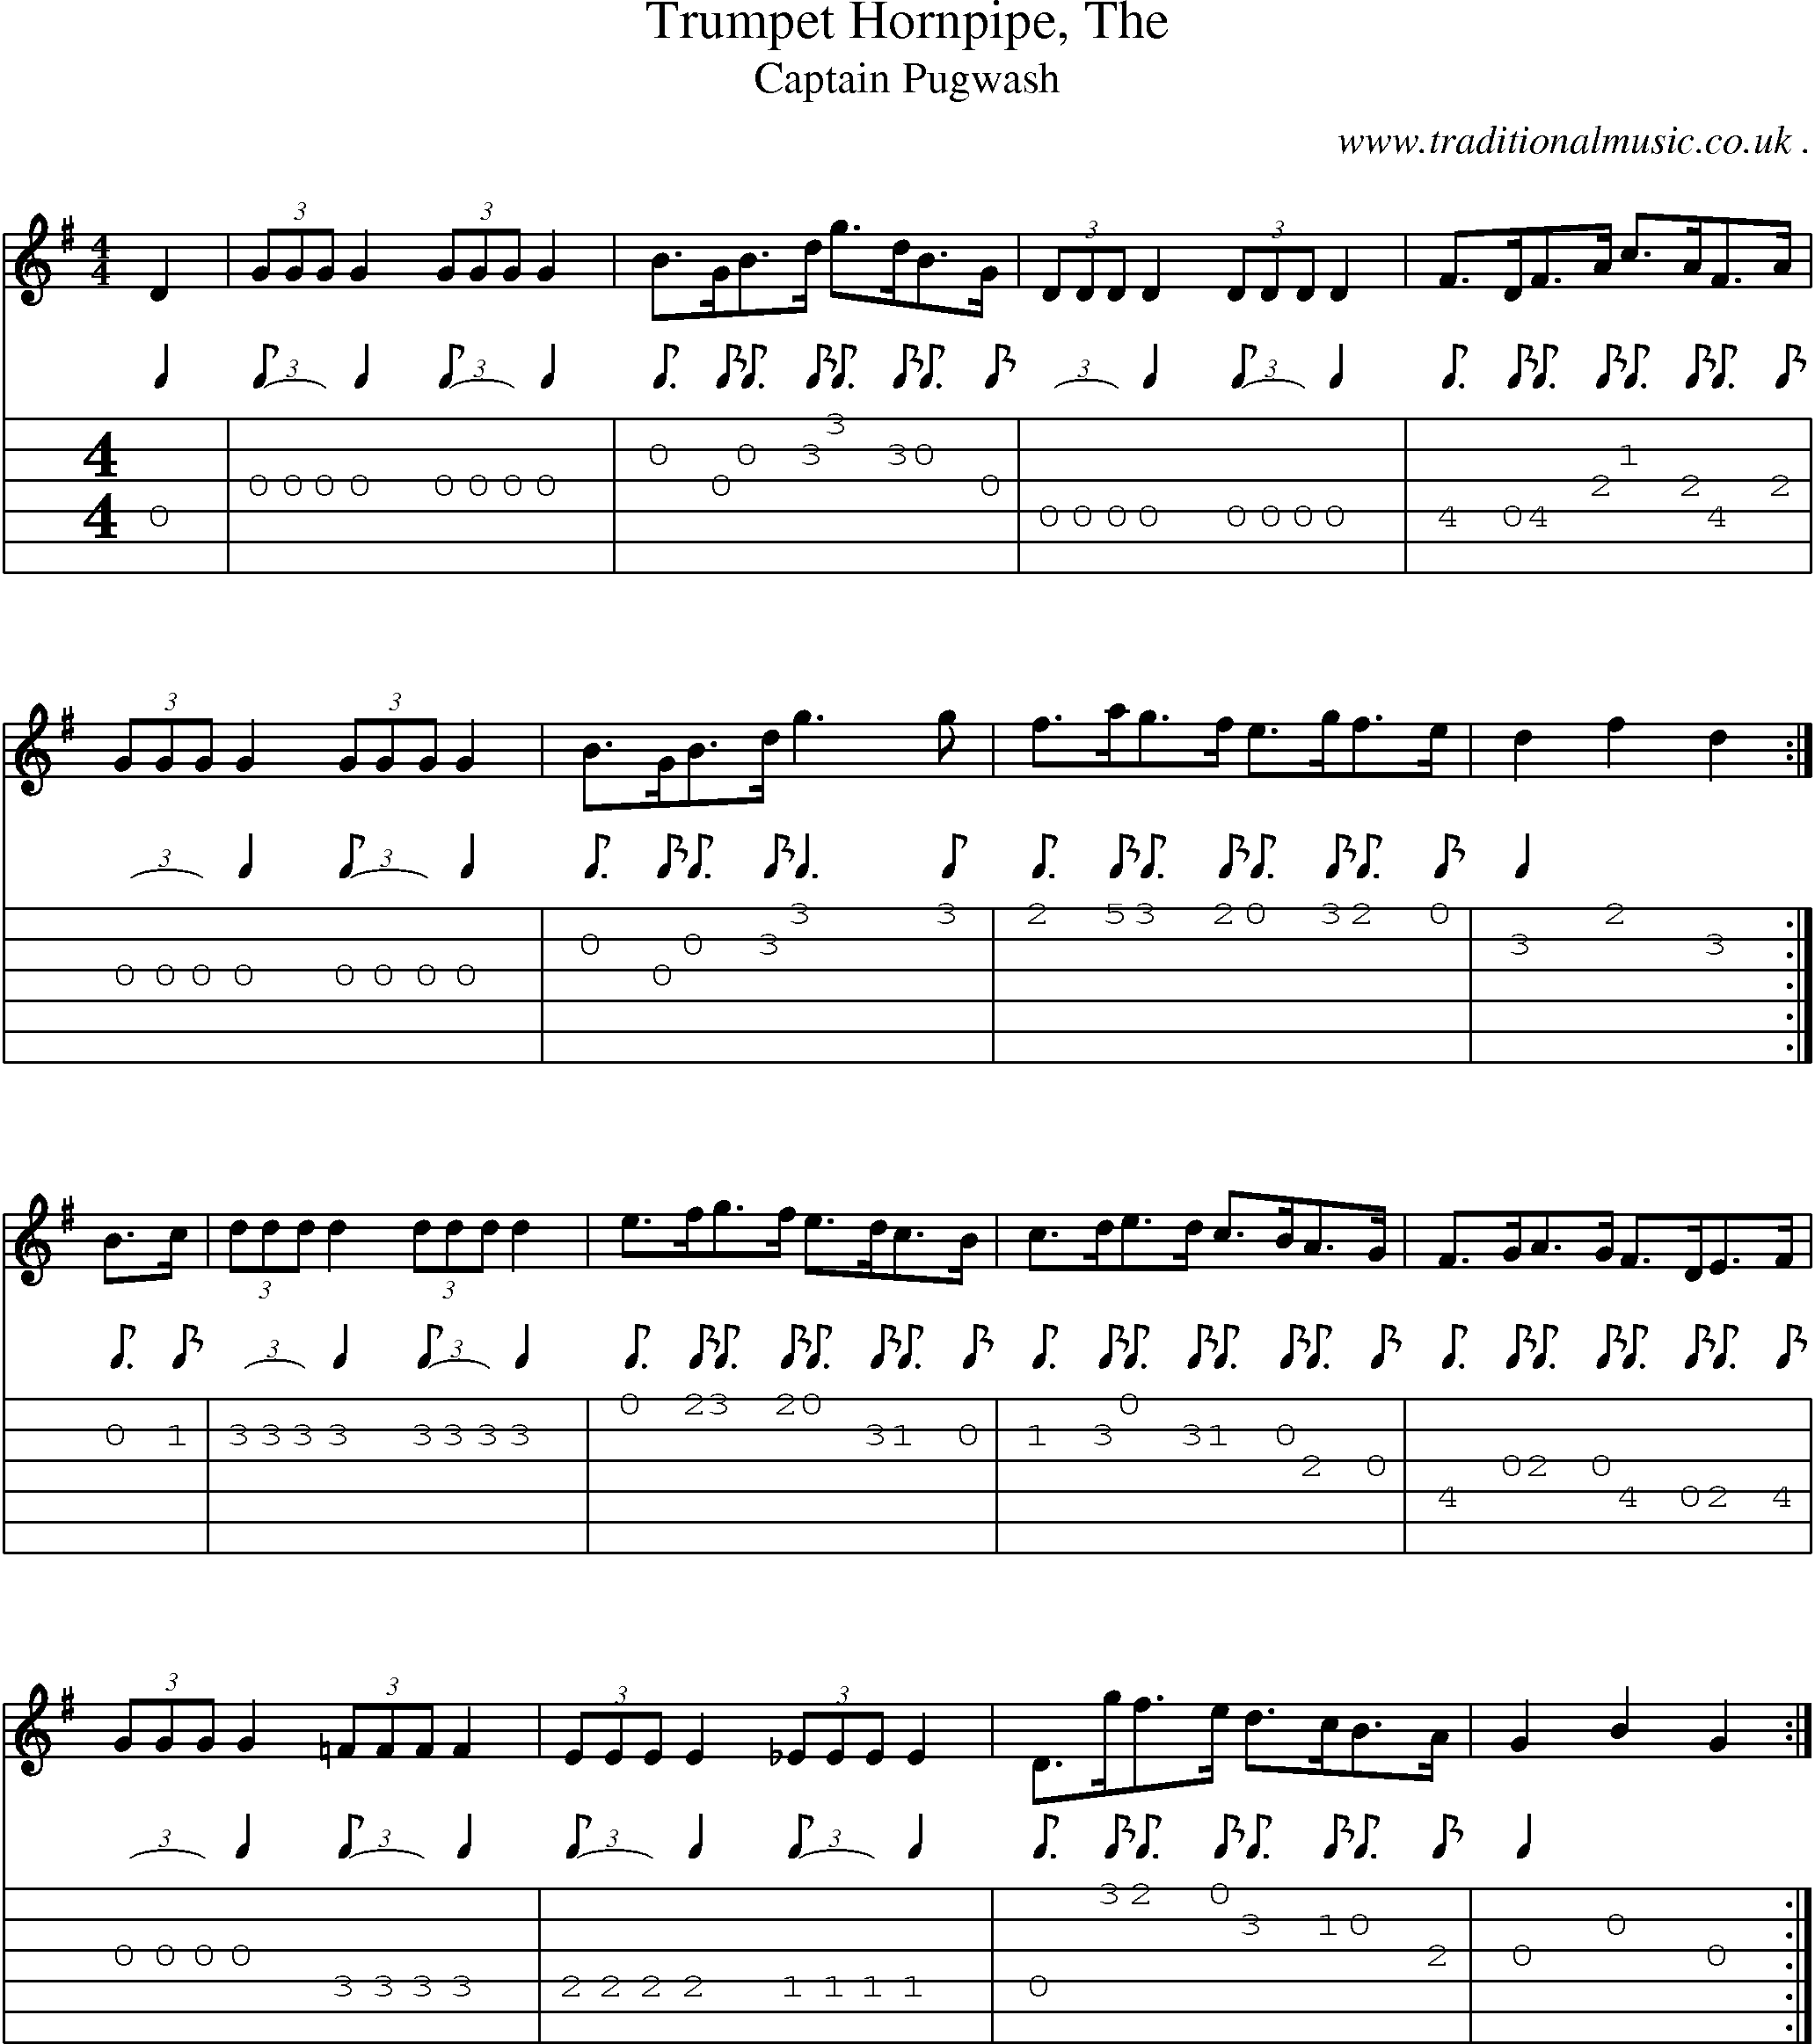 Sheet-music  score, Chords and Guitar Tabs for Trumpet Hornpipe The